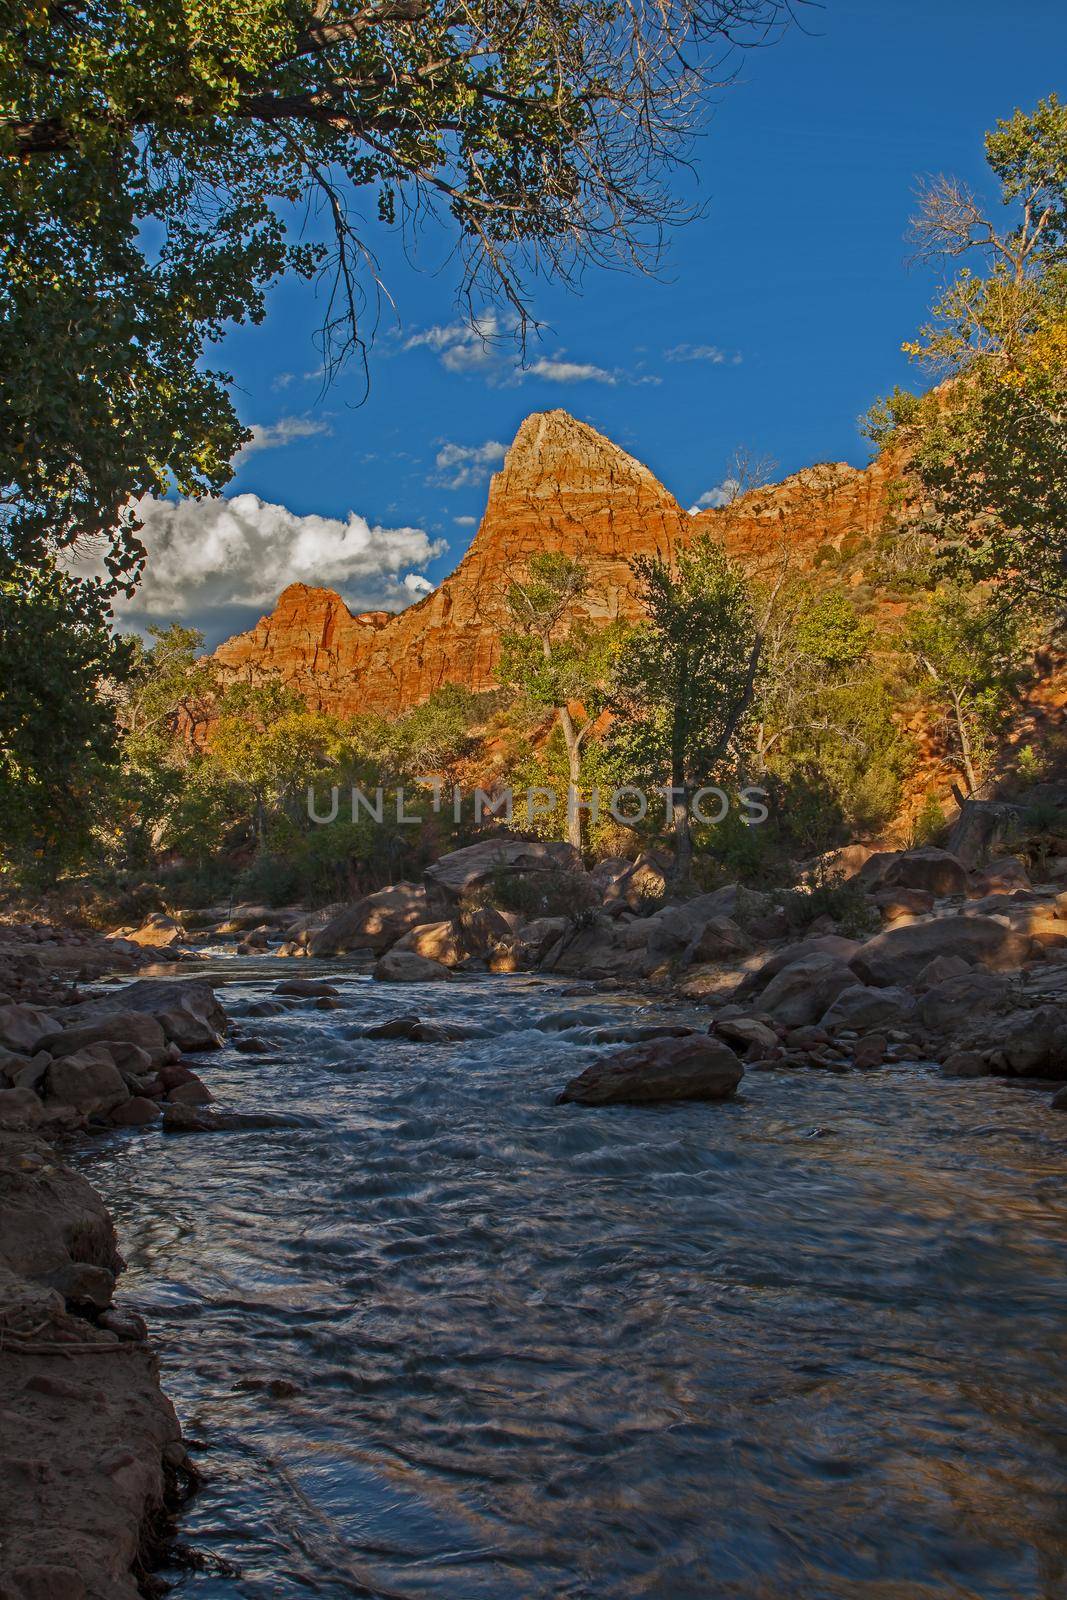 Virgin River Zion National Park 2565 by kobus_peche